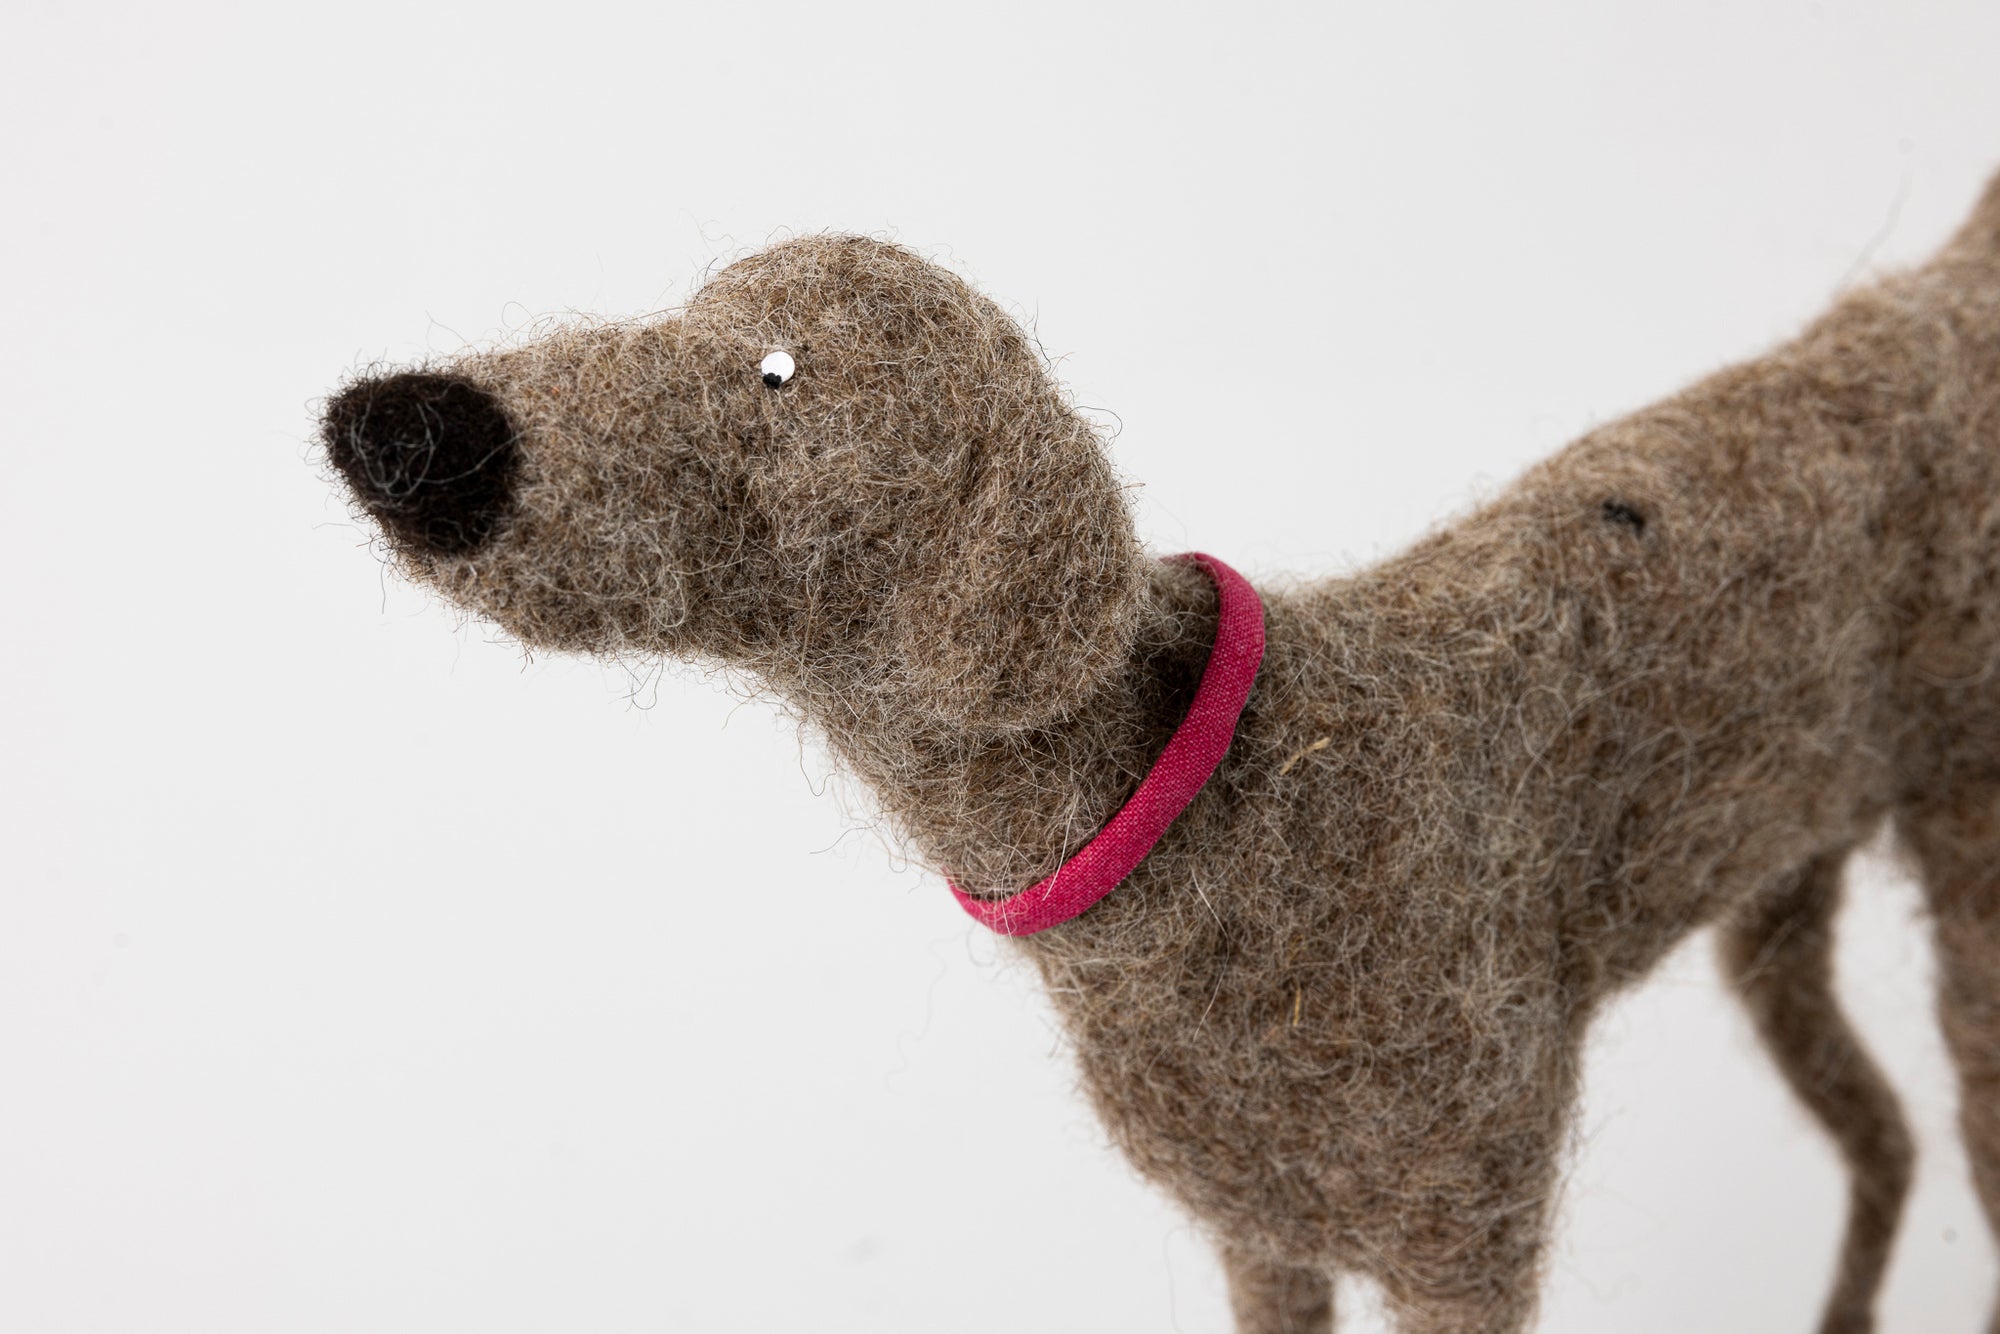 'Good Boy' needlefelt character dog by Kate Toms, available at Padstow Gallery, Cornwall